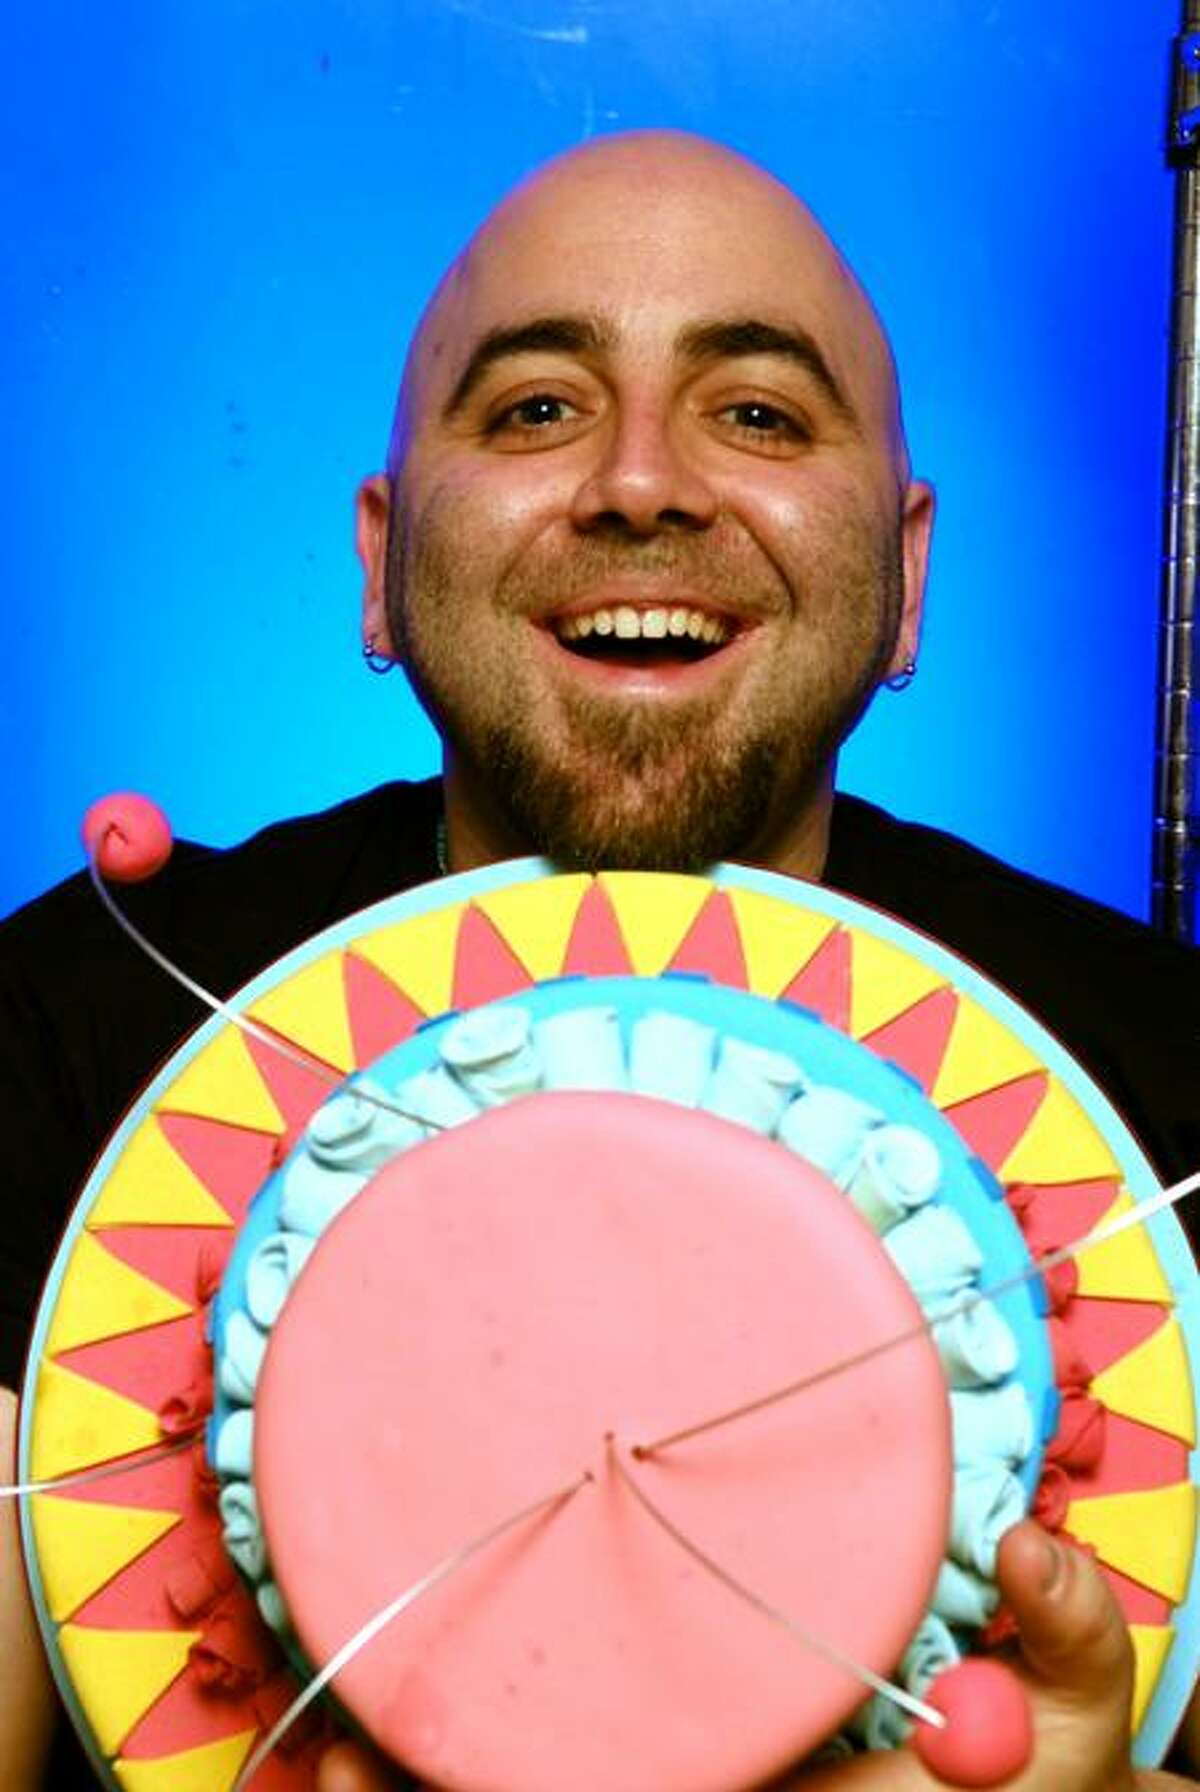 Got a culinary question? Duff Goldman of Food Network's "Ace of Cakes" and Jacques Pepin of Madison will be on hand for the evening in Yale's Woolsey Hall.